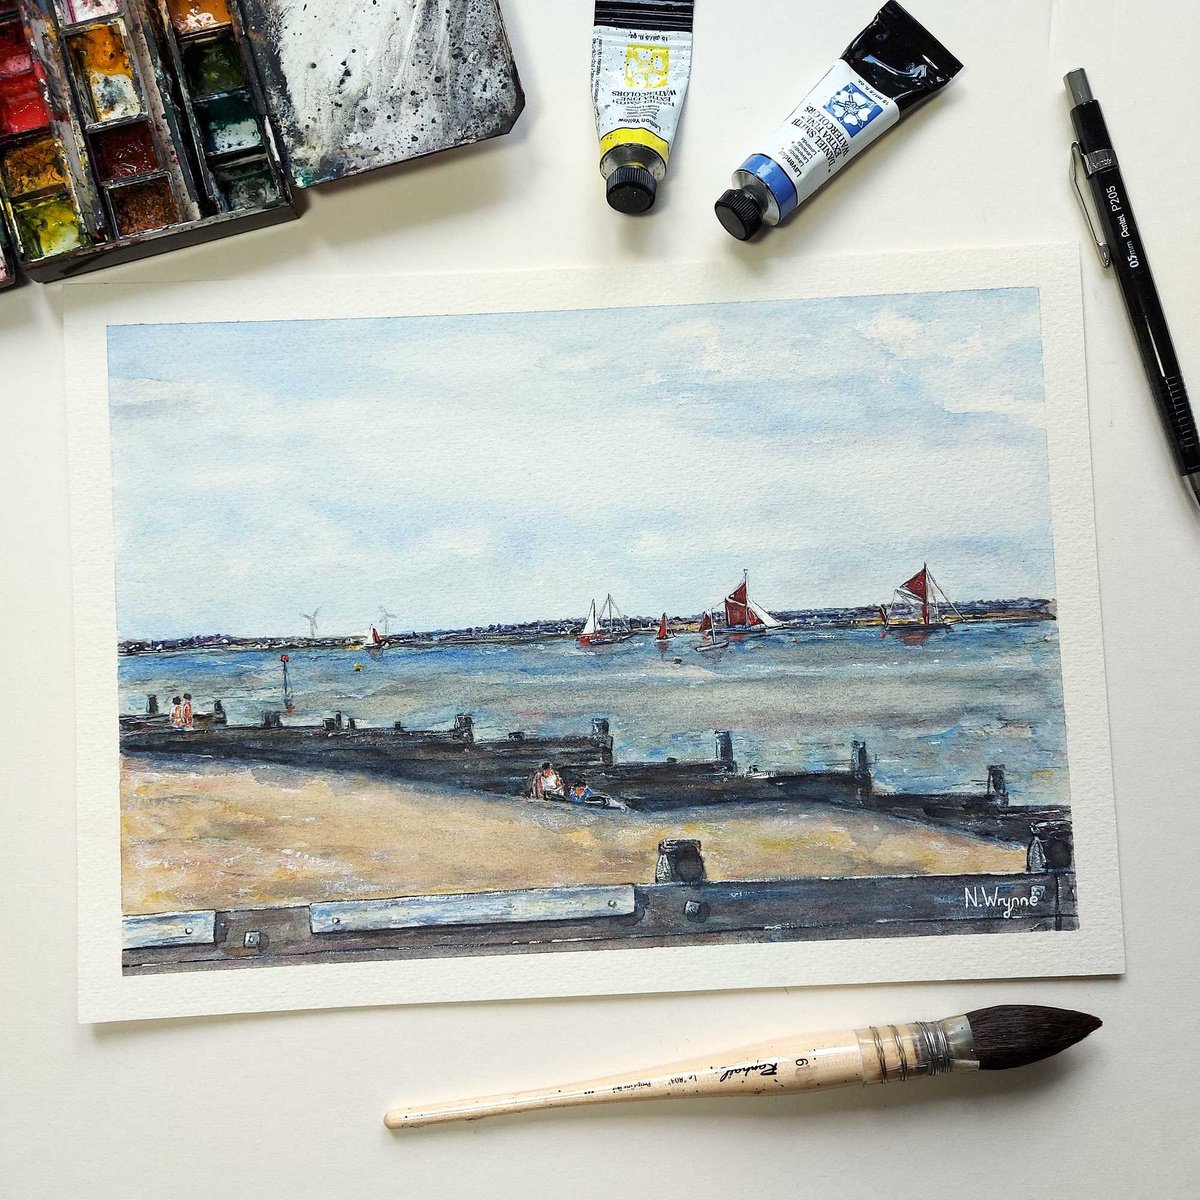 Thames Sailing Barges at Whitstable by Neil Wrynne